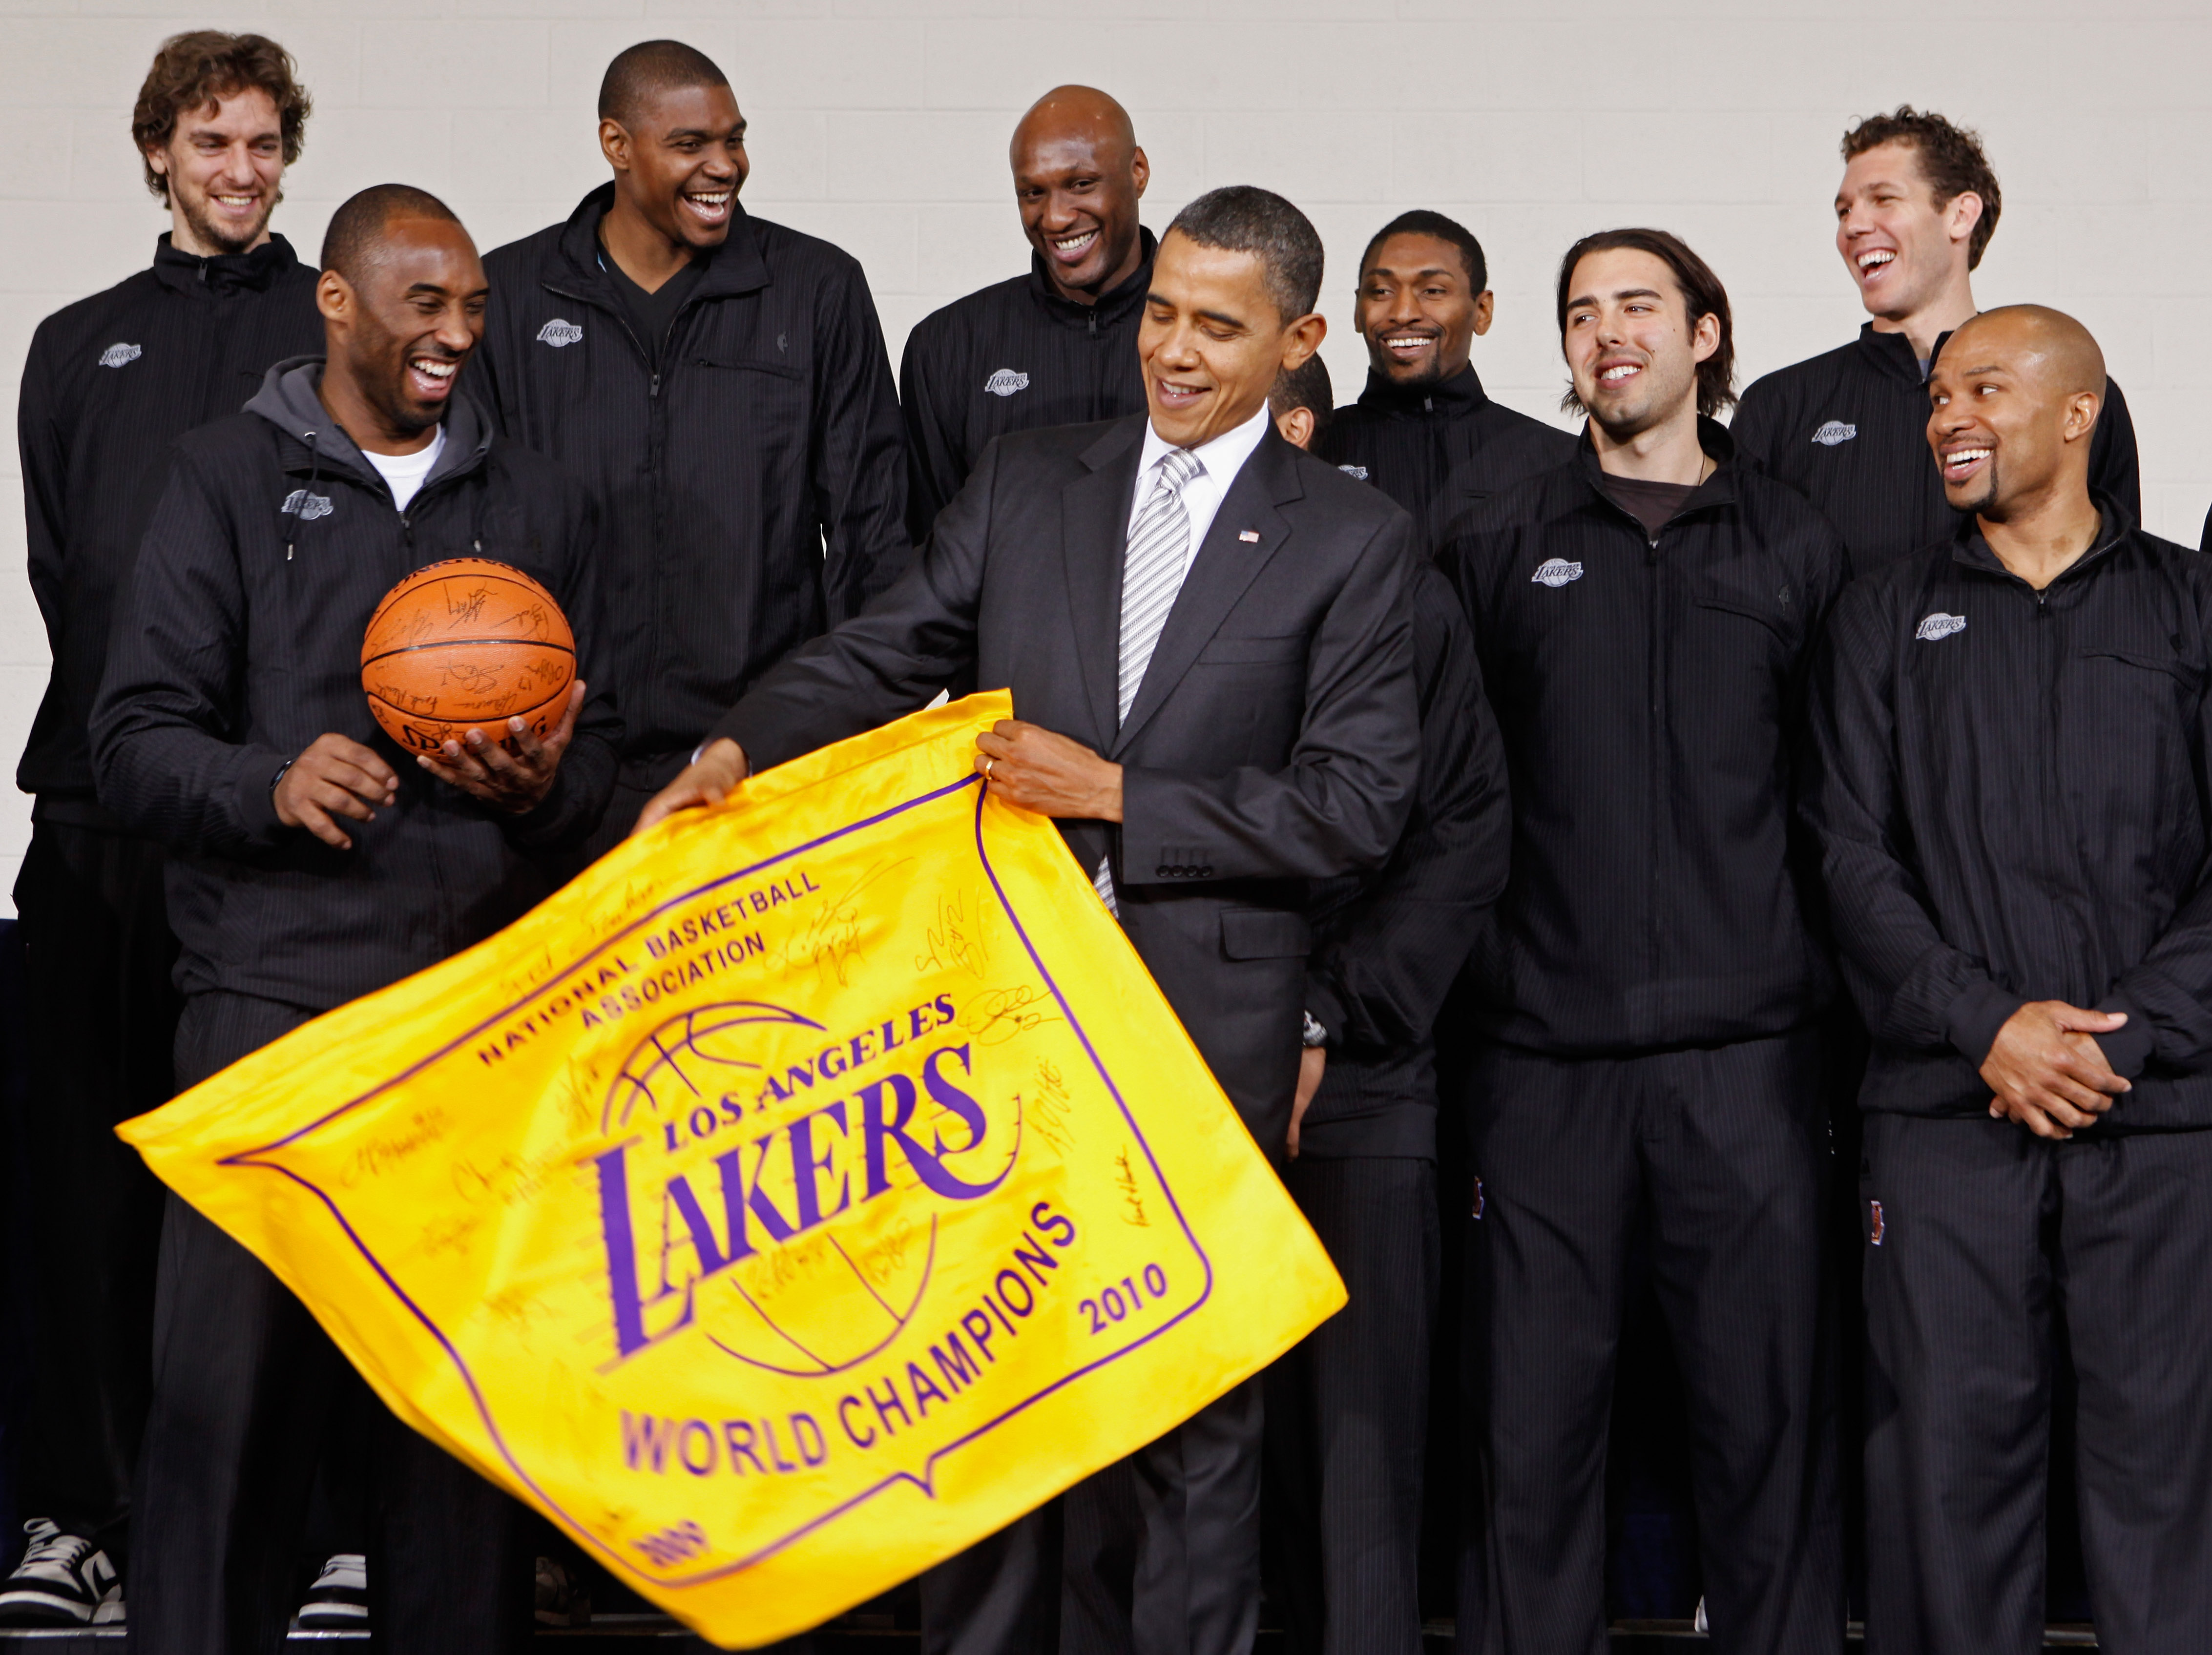 WASHINGTON, DC - DECEMBER 13:  (AFP OUT) U.S. President Barack Obama (C) receives an autographed championship flag and basketball from members of the Los Angeles Lakers (L-R) Paul Gasol, Kobe Bryant, Andrew Bynum, Lamar Odom, Ron Artest, Aleksandar Vujaci